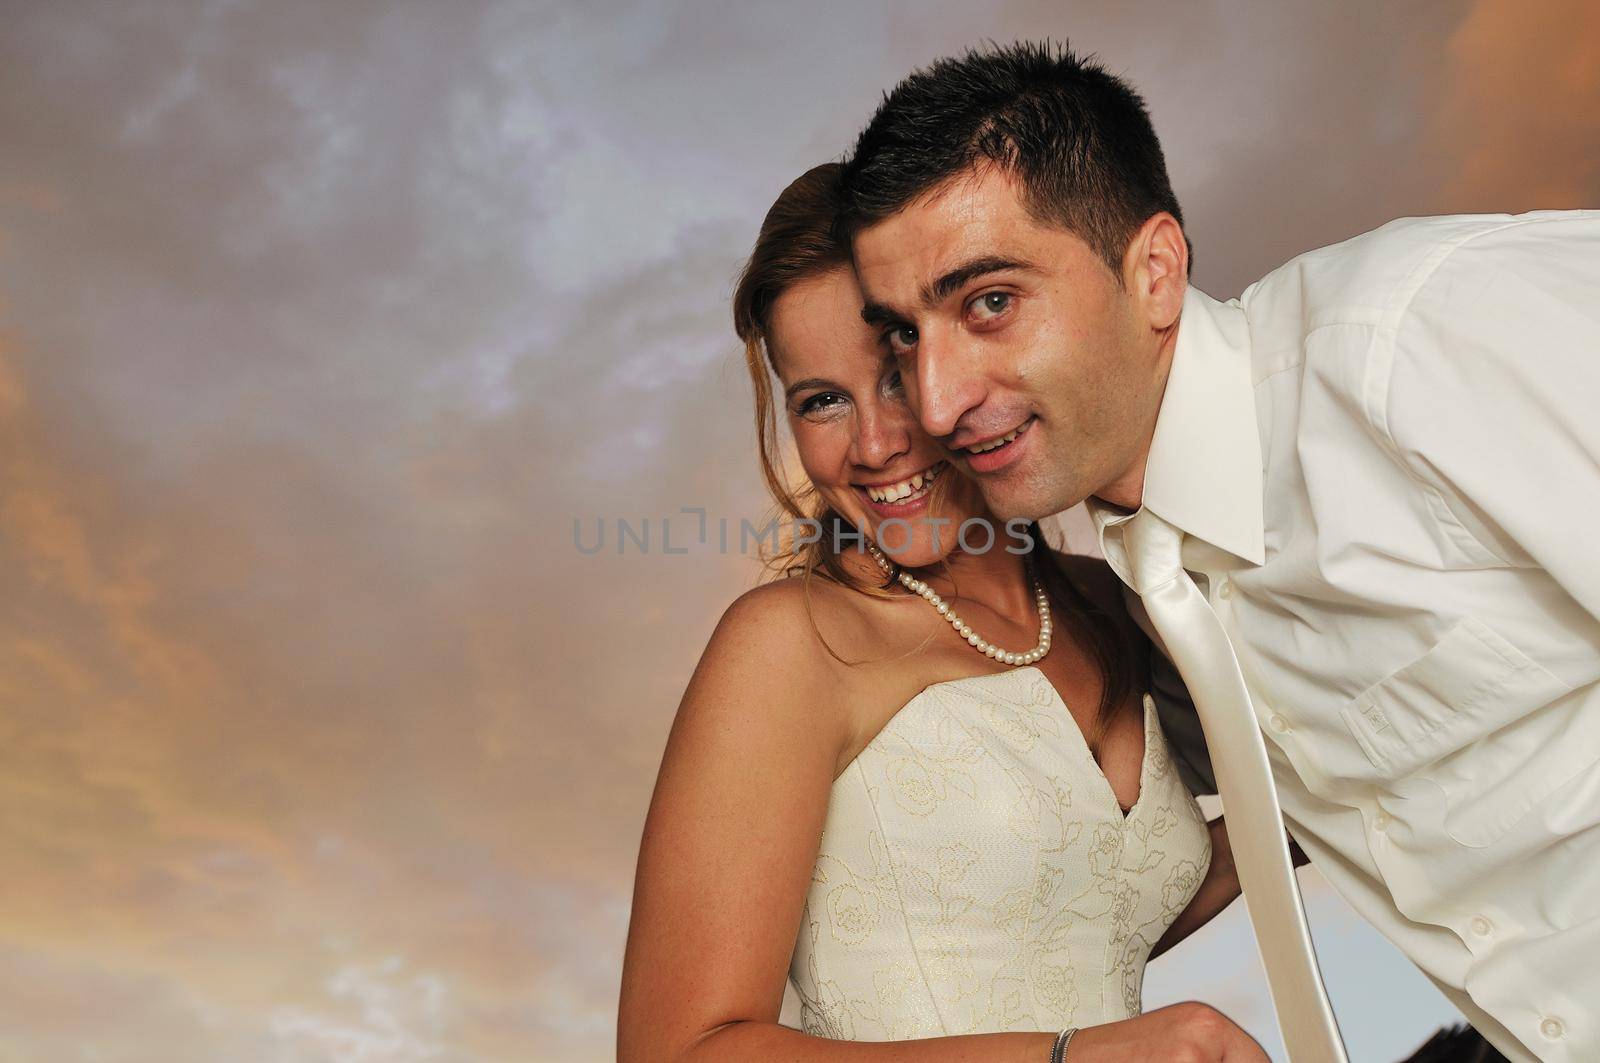 happy young and beautiful bride and groom at wedding party  outdoor